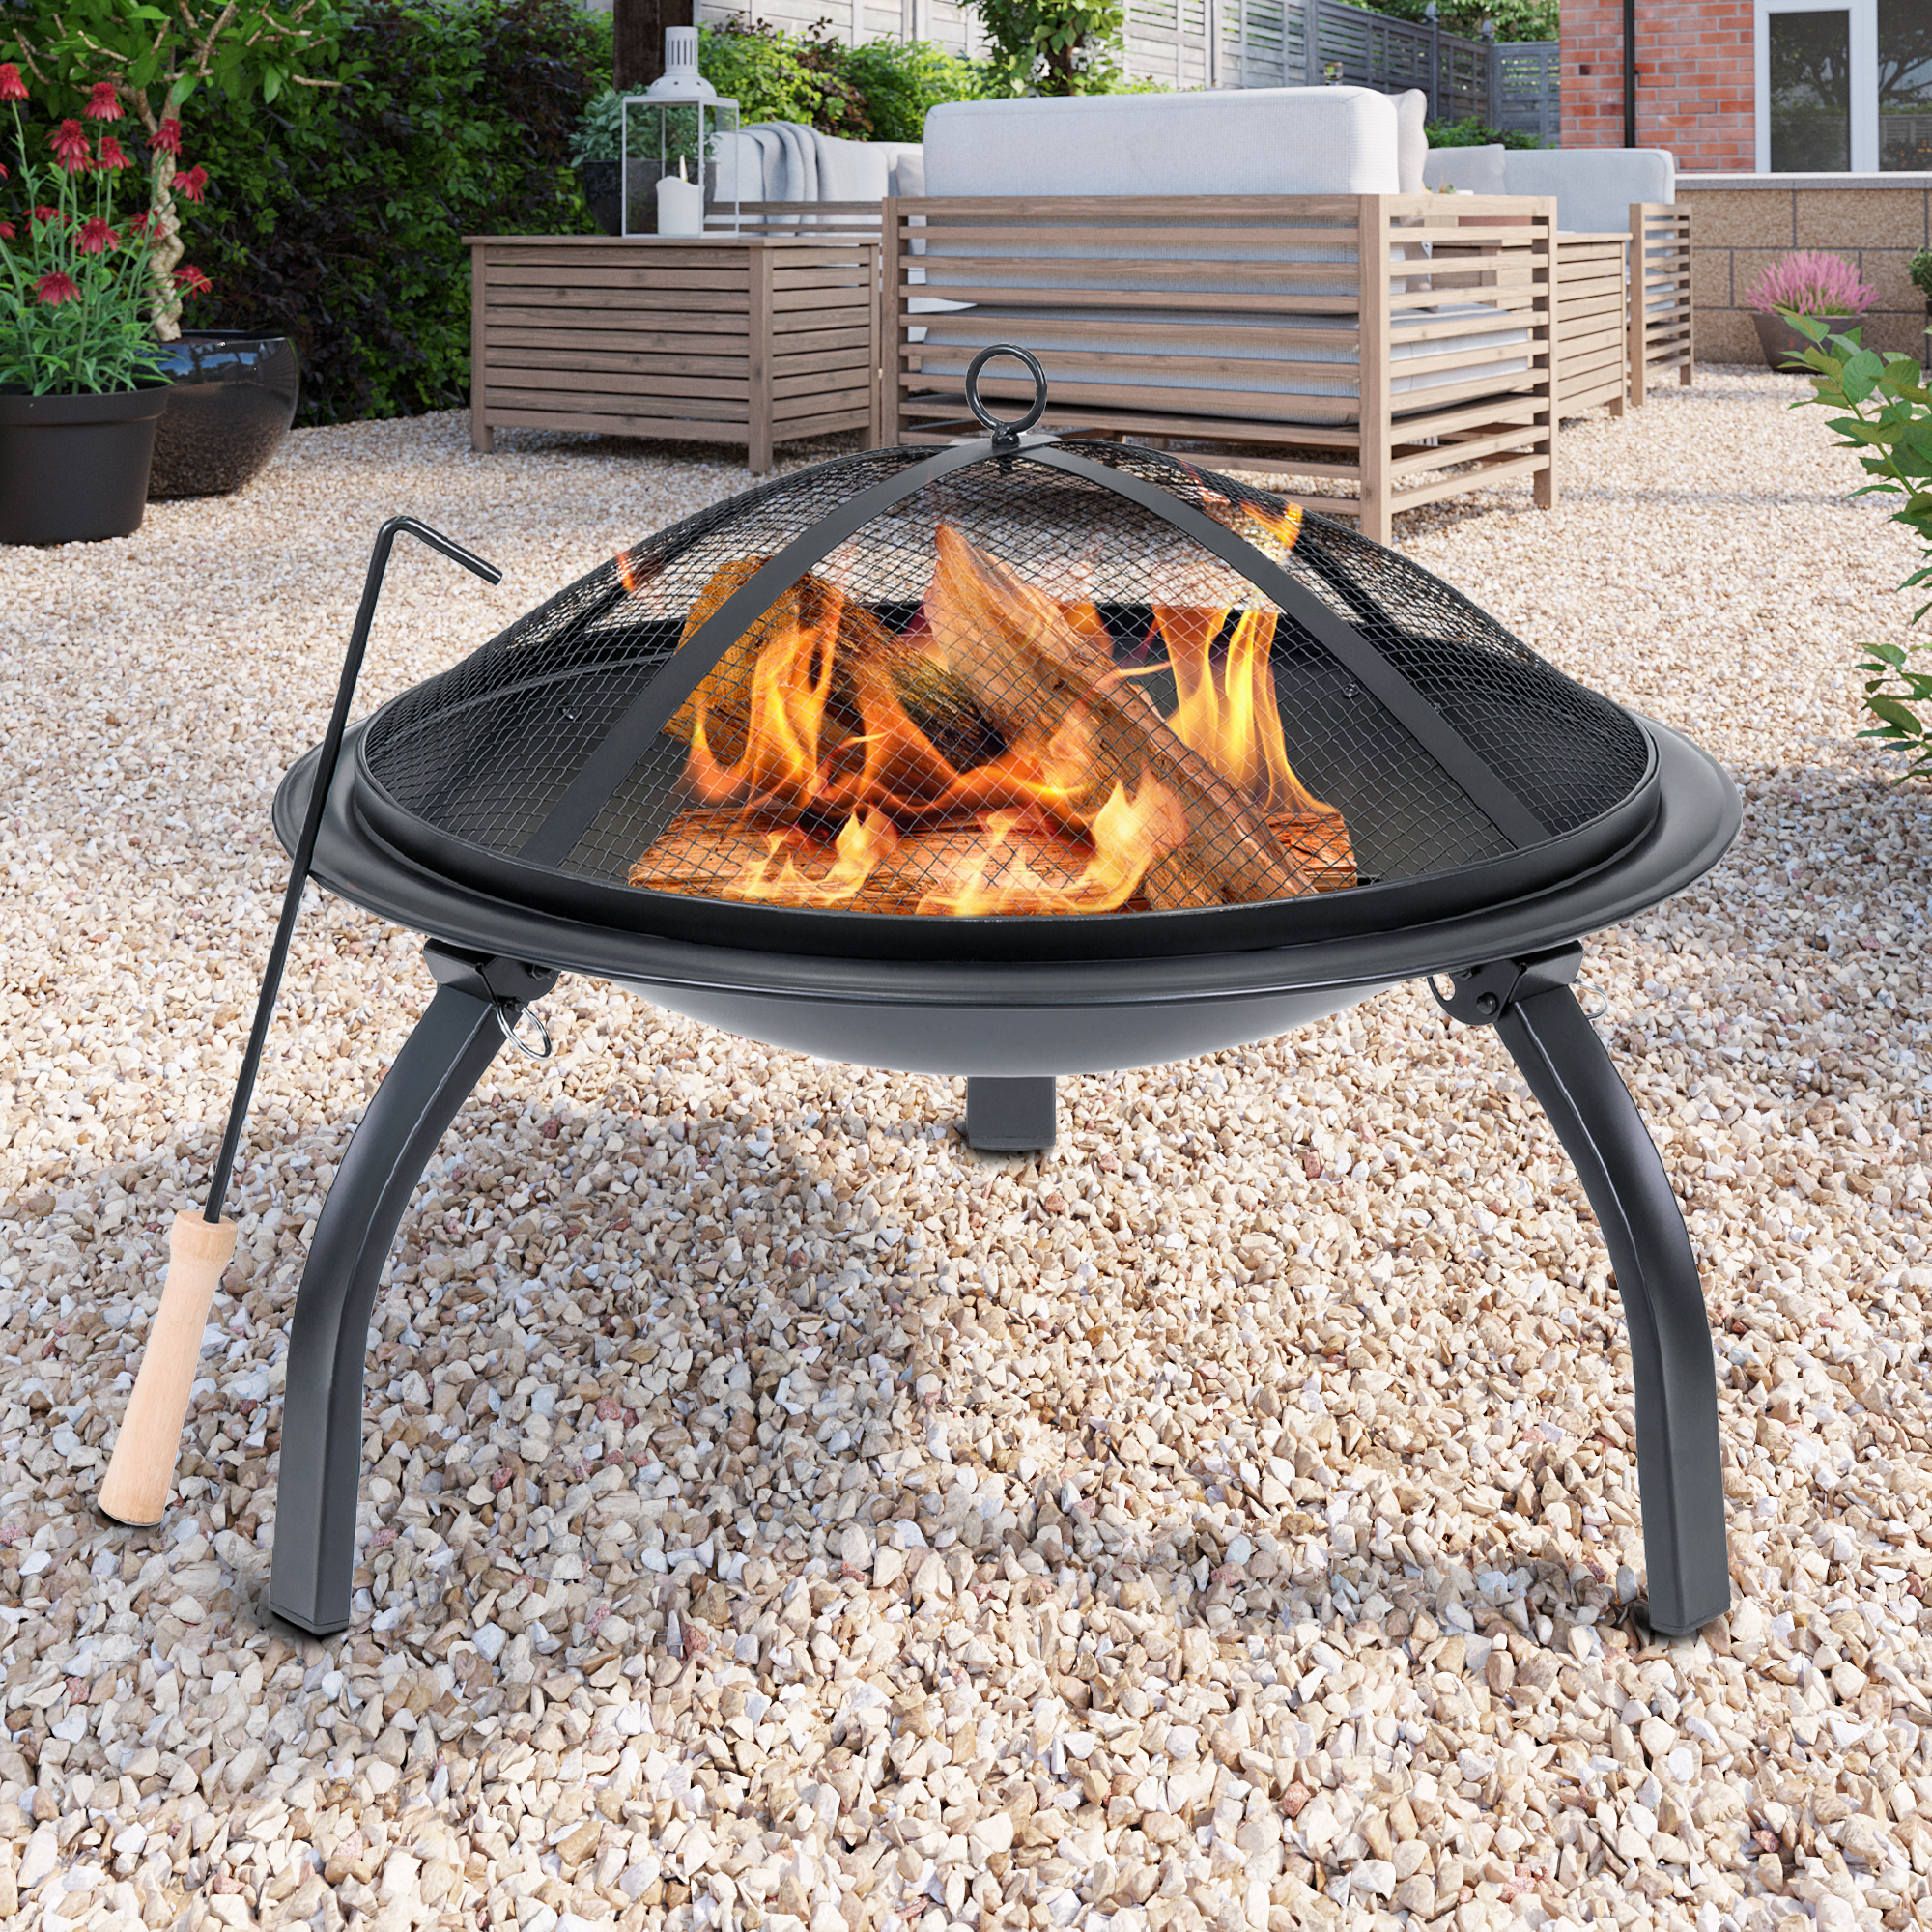 Image of BillyOh Oakland Small Round Foldable Steel Fire Pit - Small Foldable Fire Pit